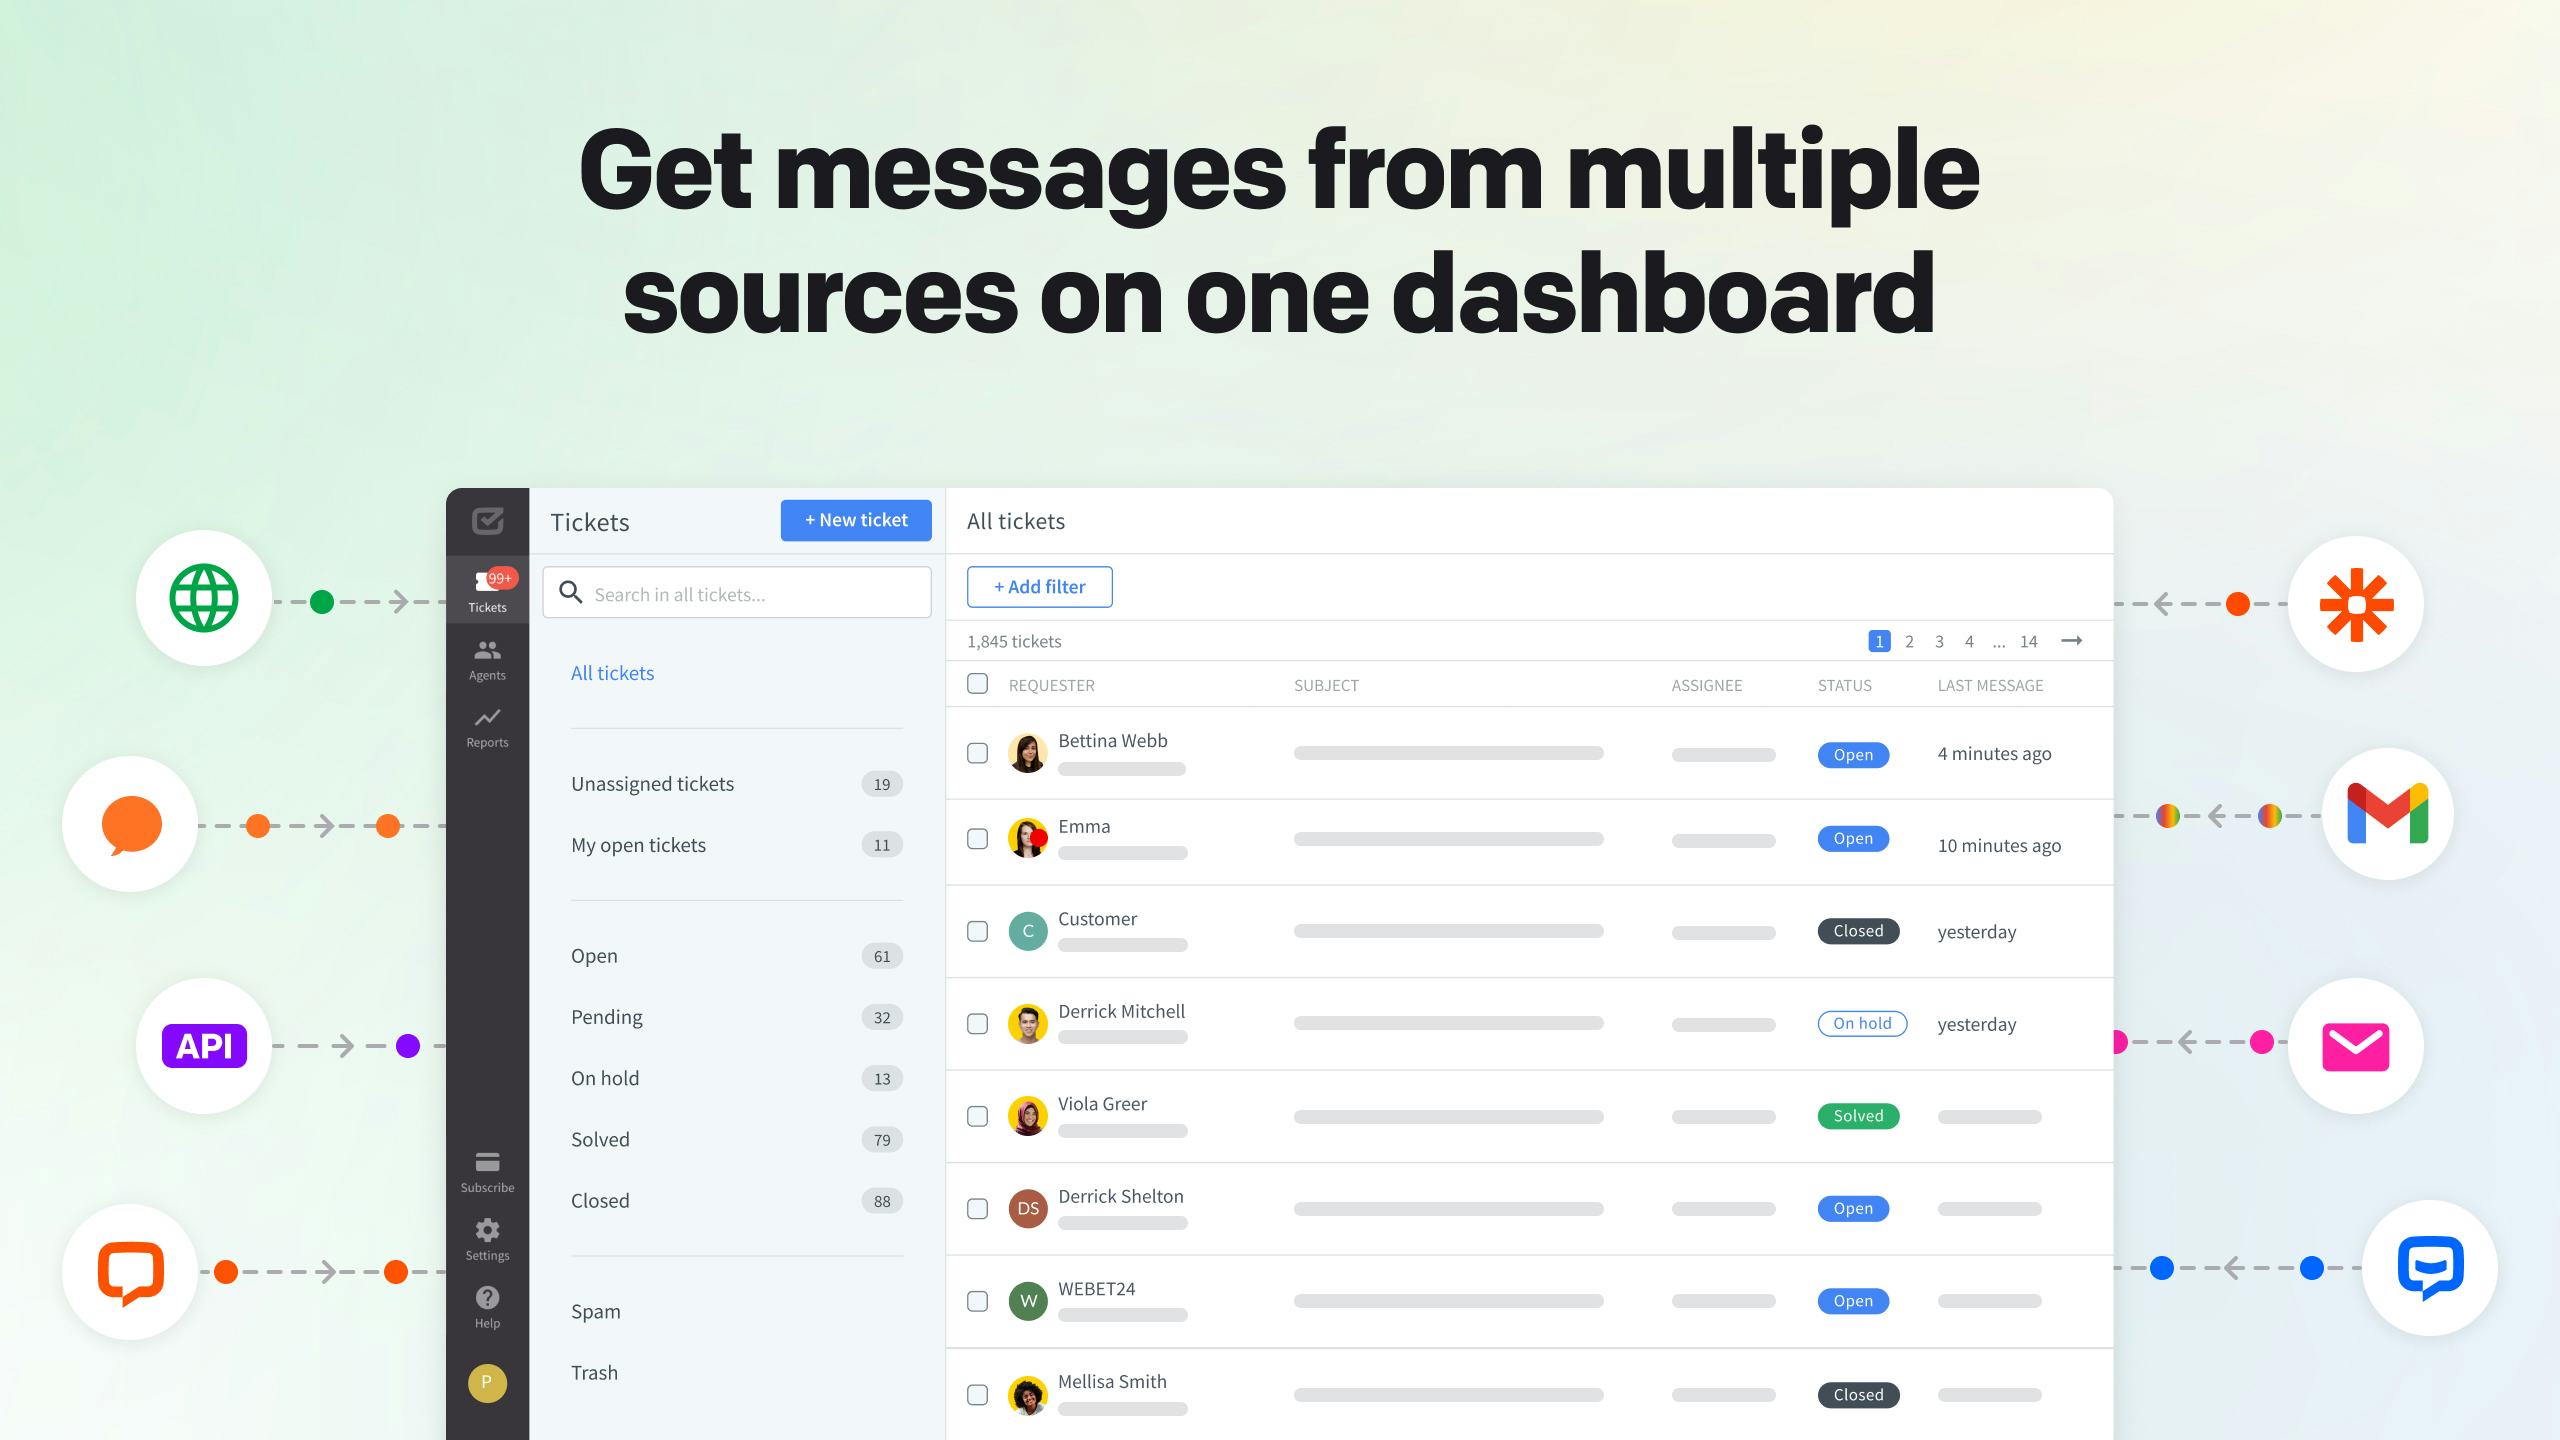 HelpDesk Software - Get messages from multiple sources on one dashboard